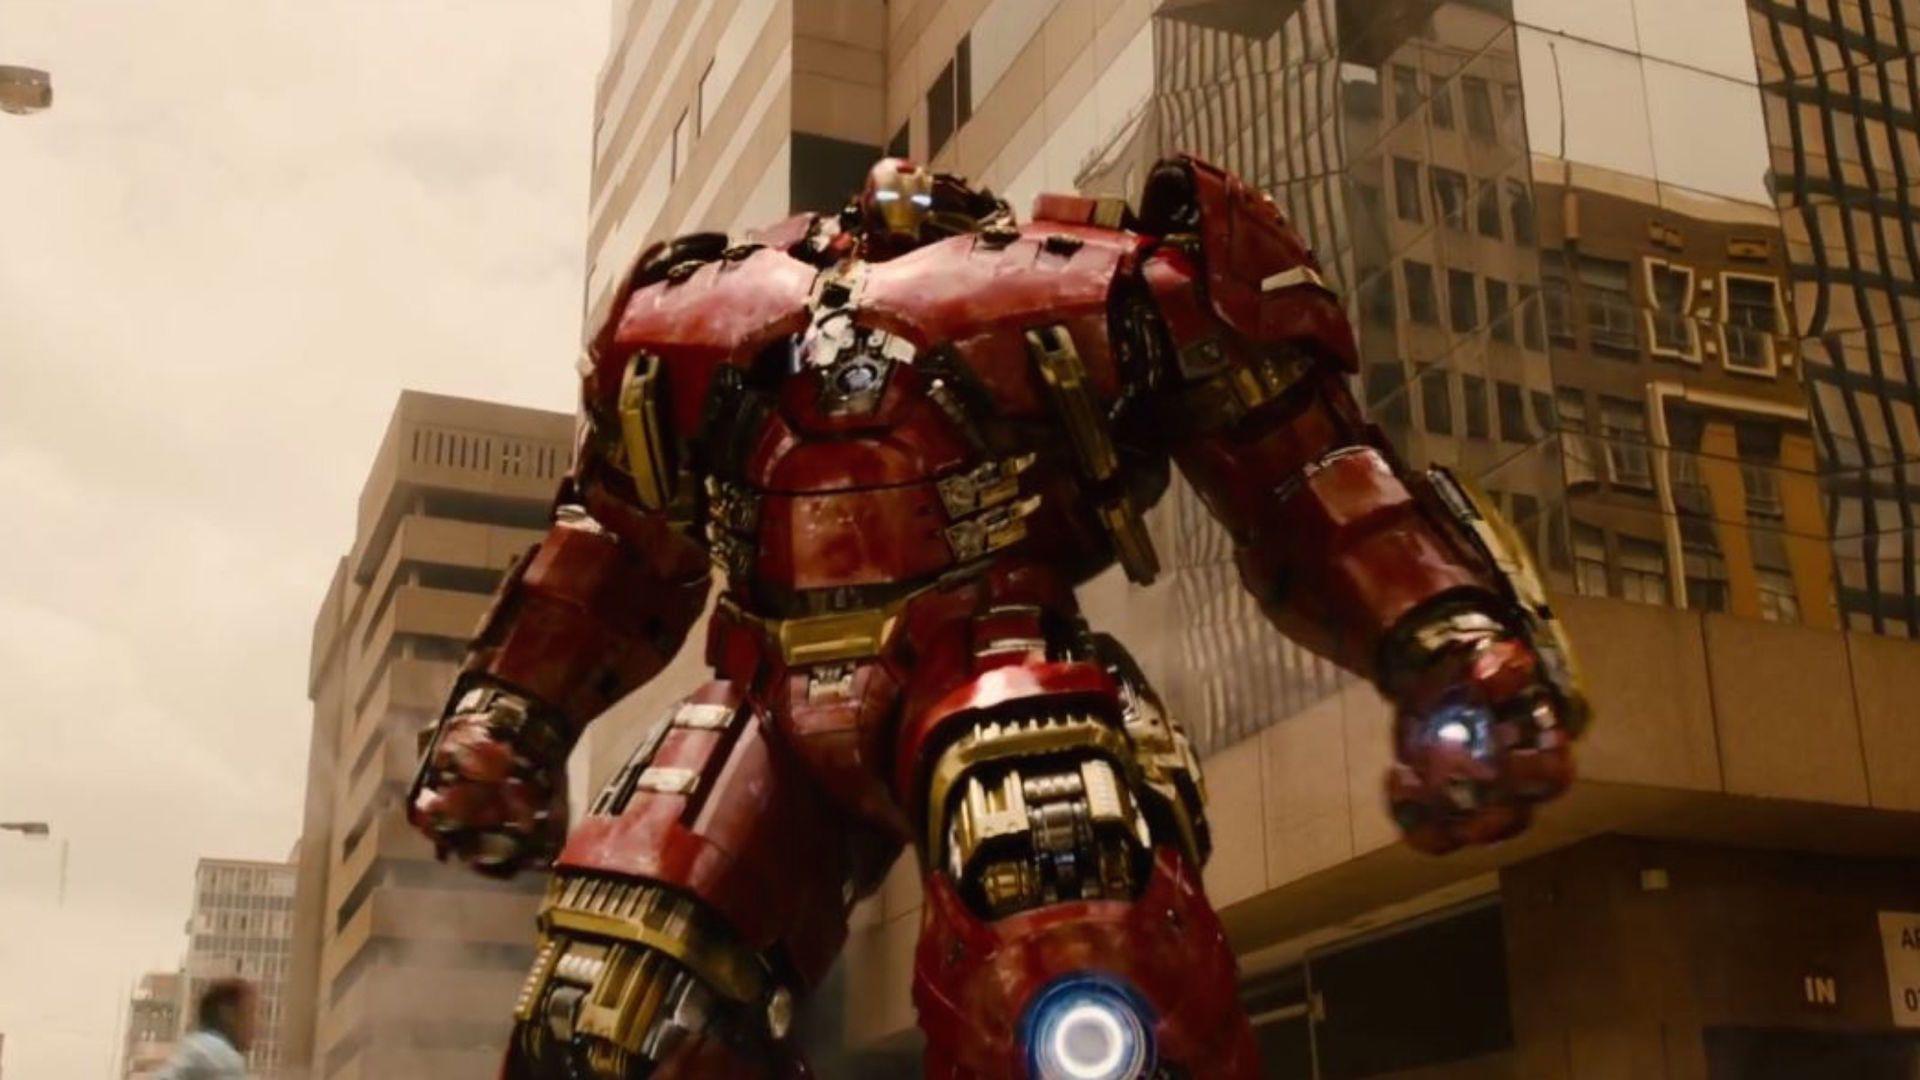 Making of Featurette for the Hulkbuster Funko Pop Figure